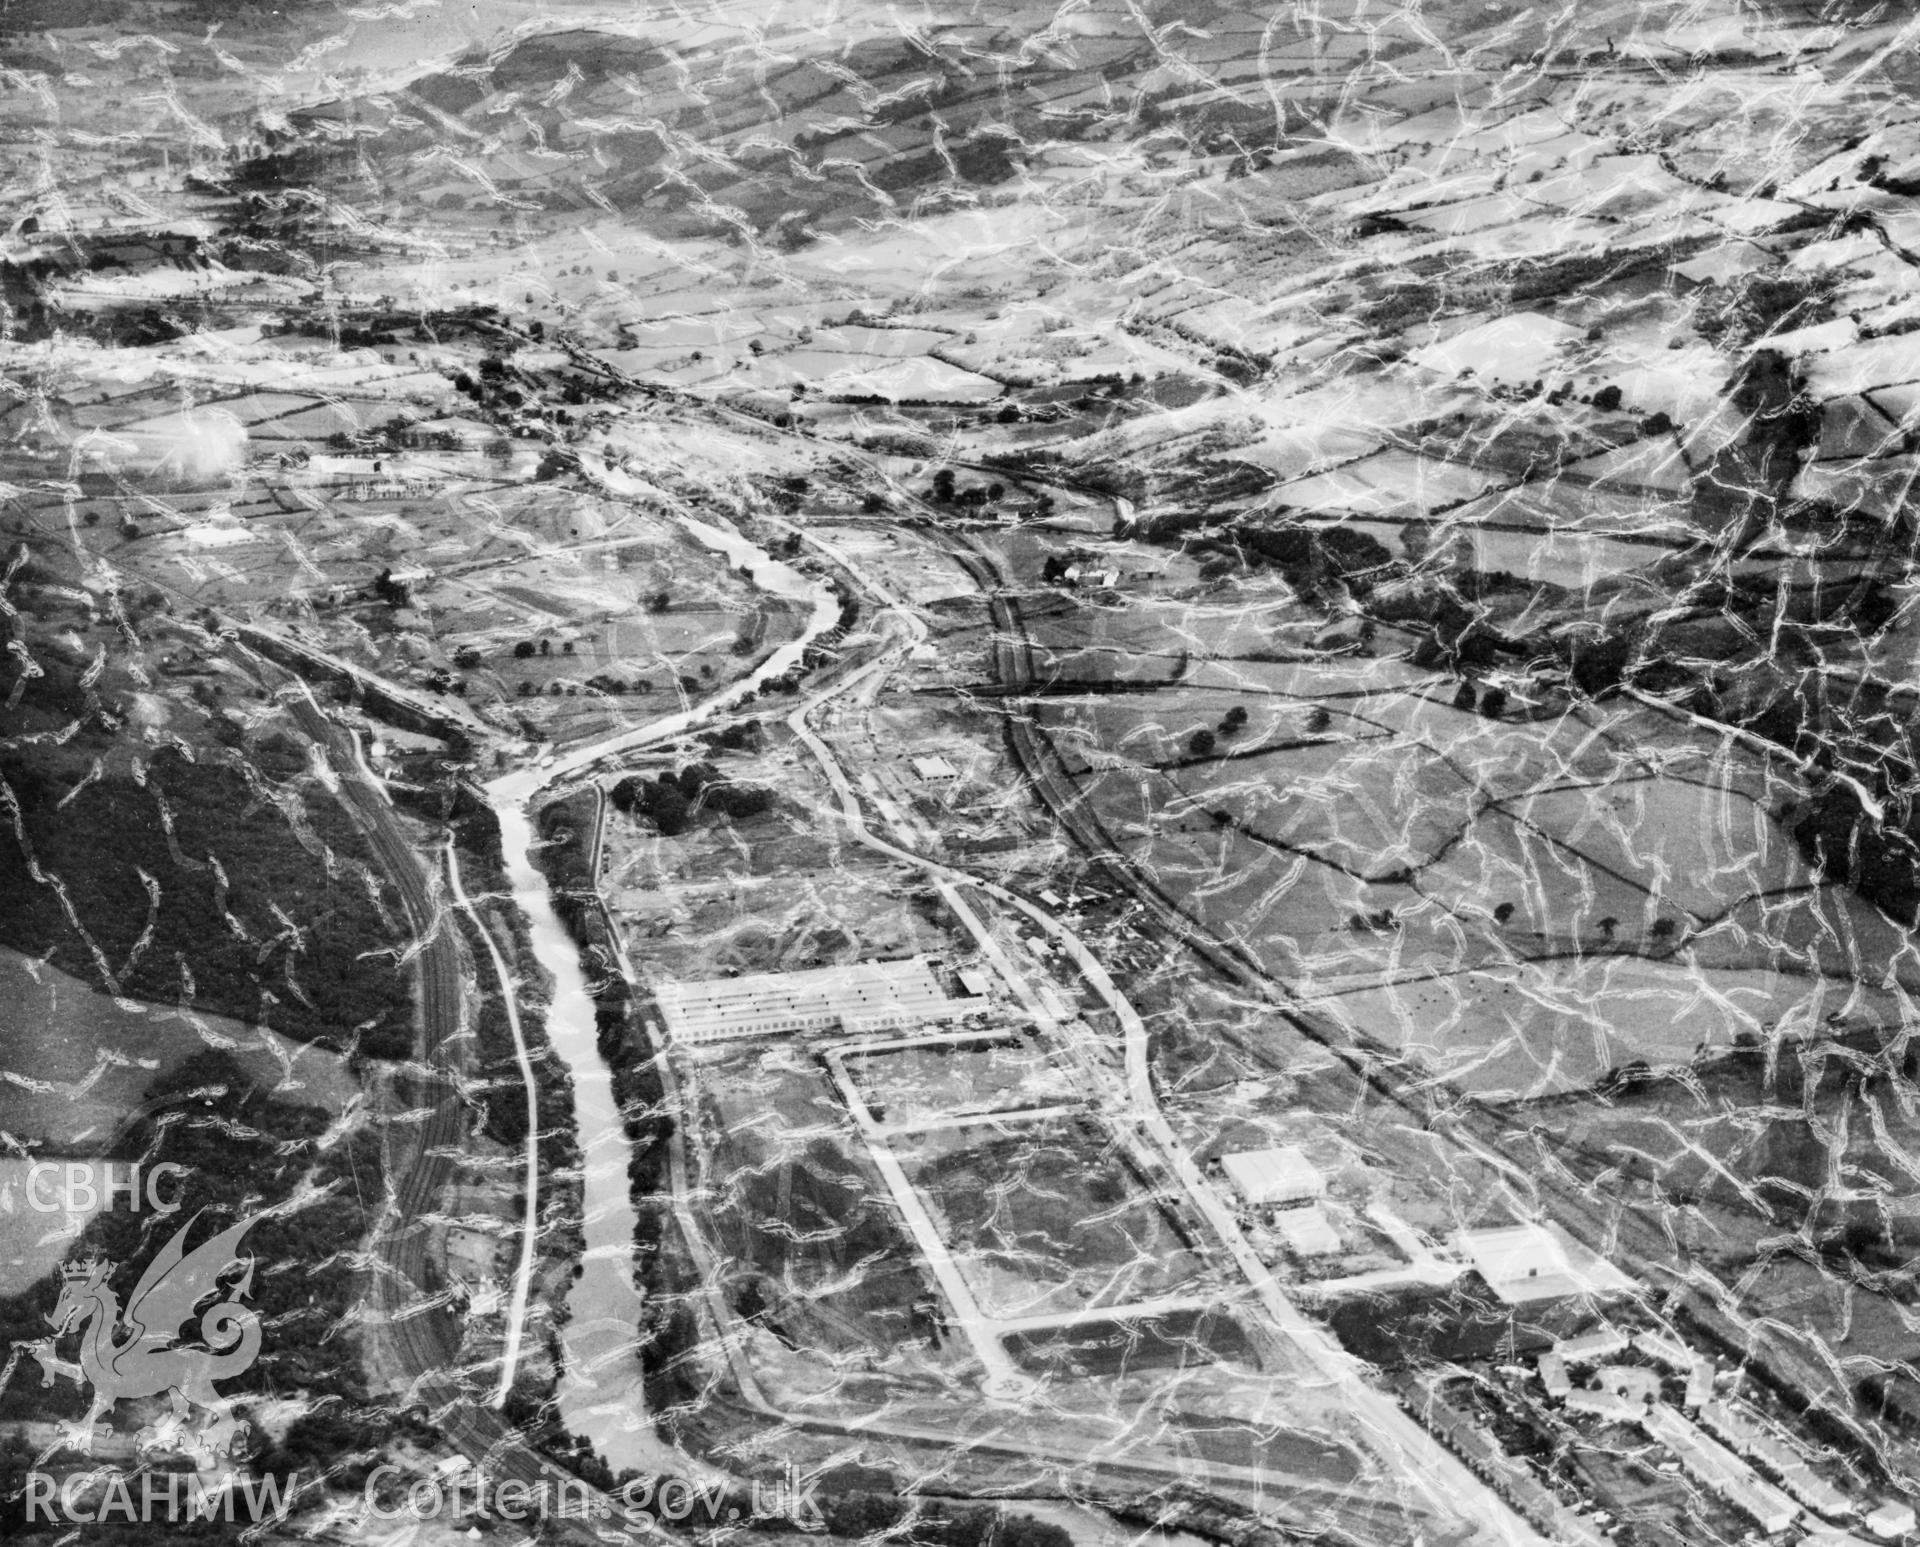 View of Treforest Trading estate. Oblique aerial photograph, 5?x4? BW glass plate.